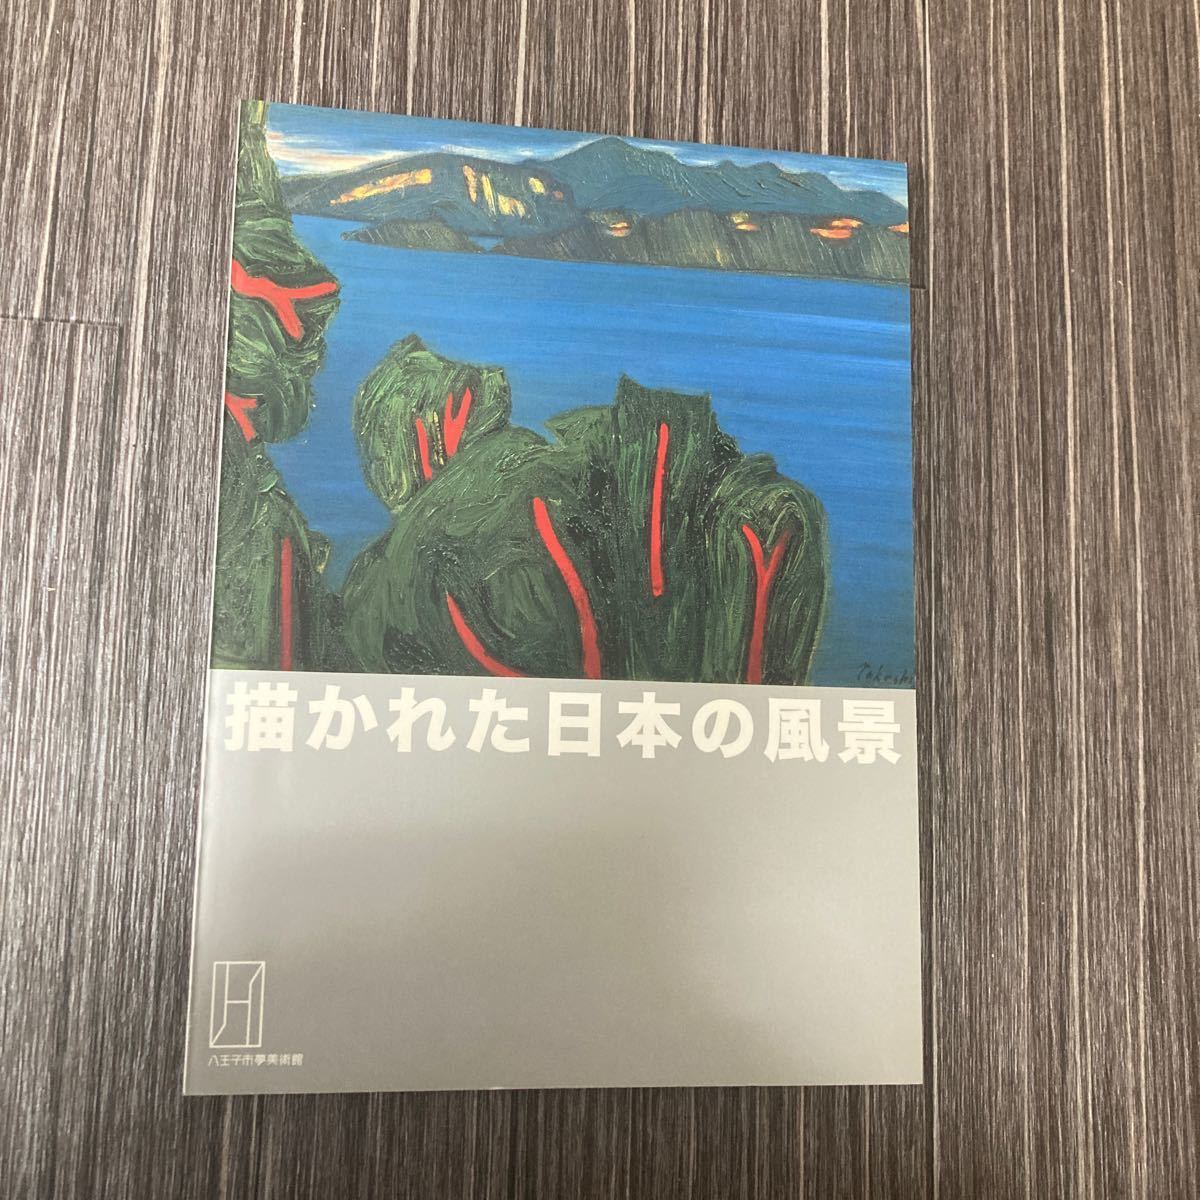 ●Hard to get! Super rare●Painted Japanese Landscapes Catalog Hachioji City Yume Art Museum/Art Planning Ray/2004/Western painting/Painting/Art book/Art/Artwork★210, Painting, Art Book, Collection, Catalog